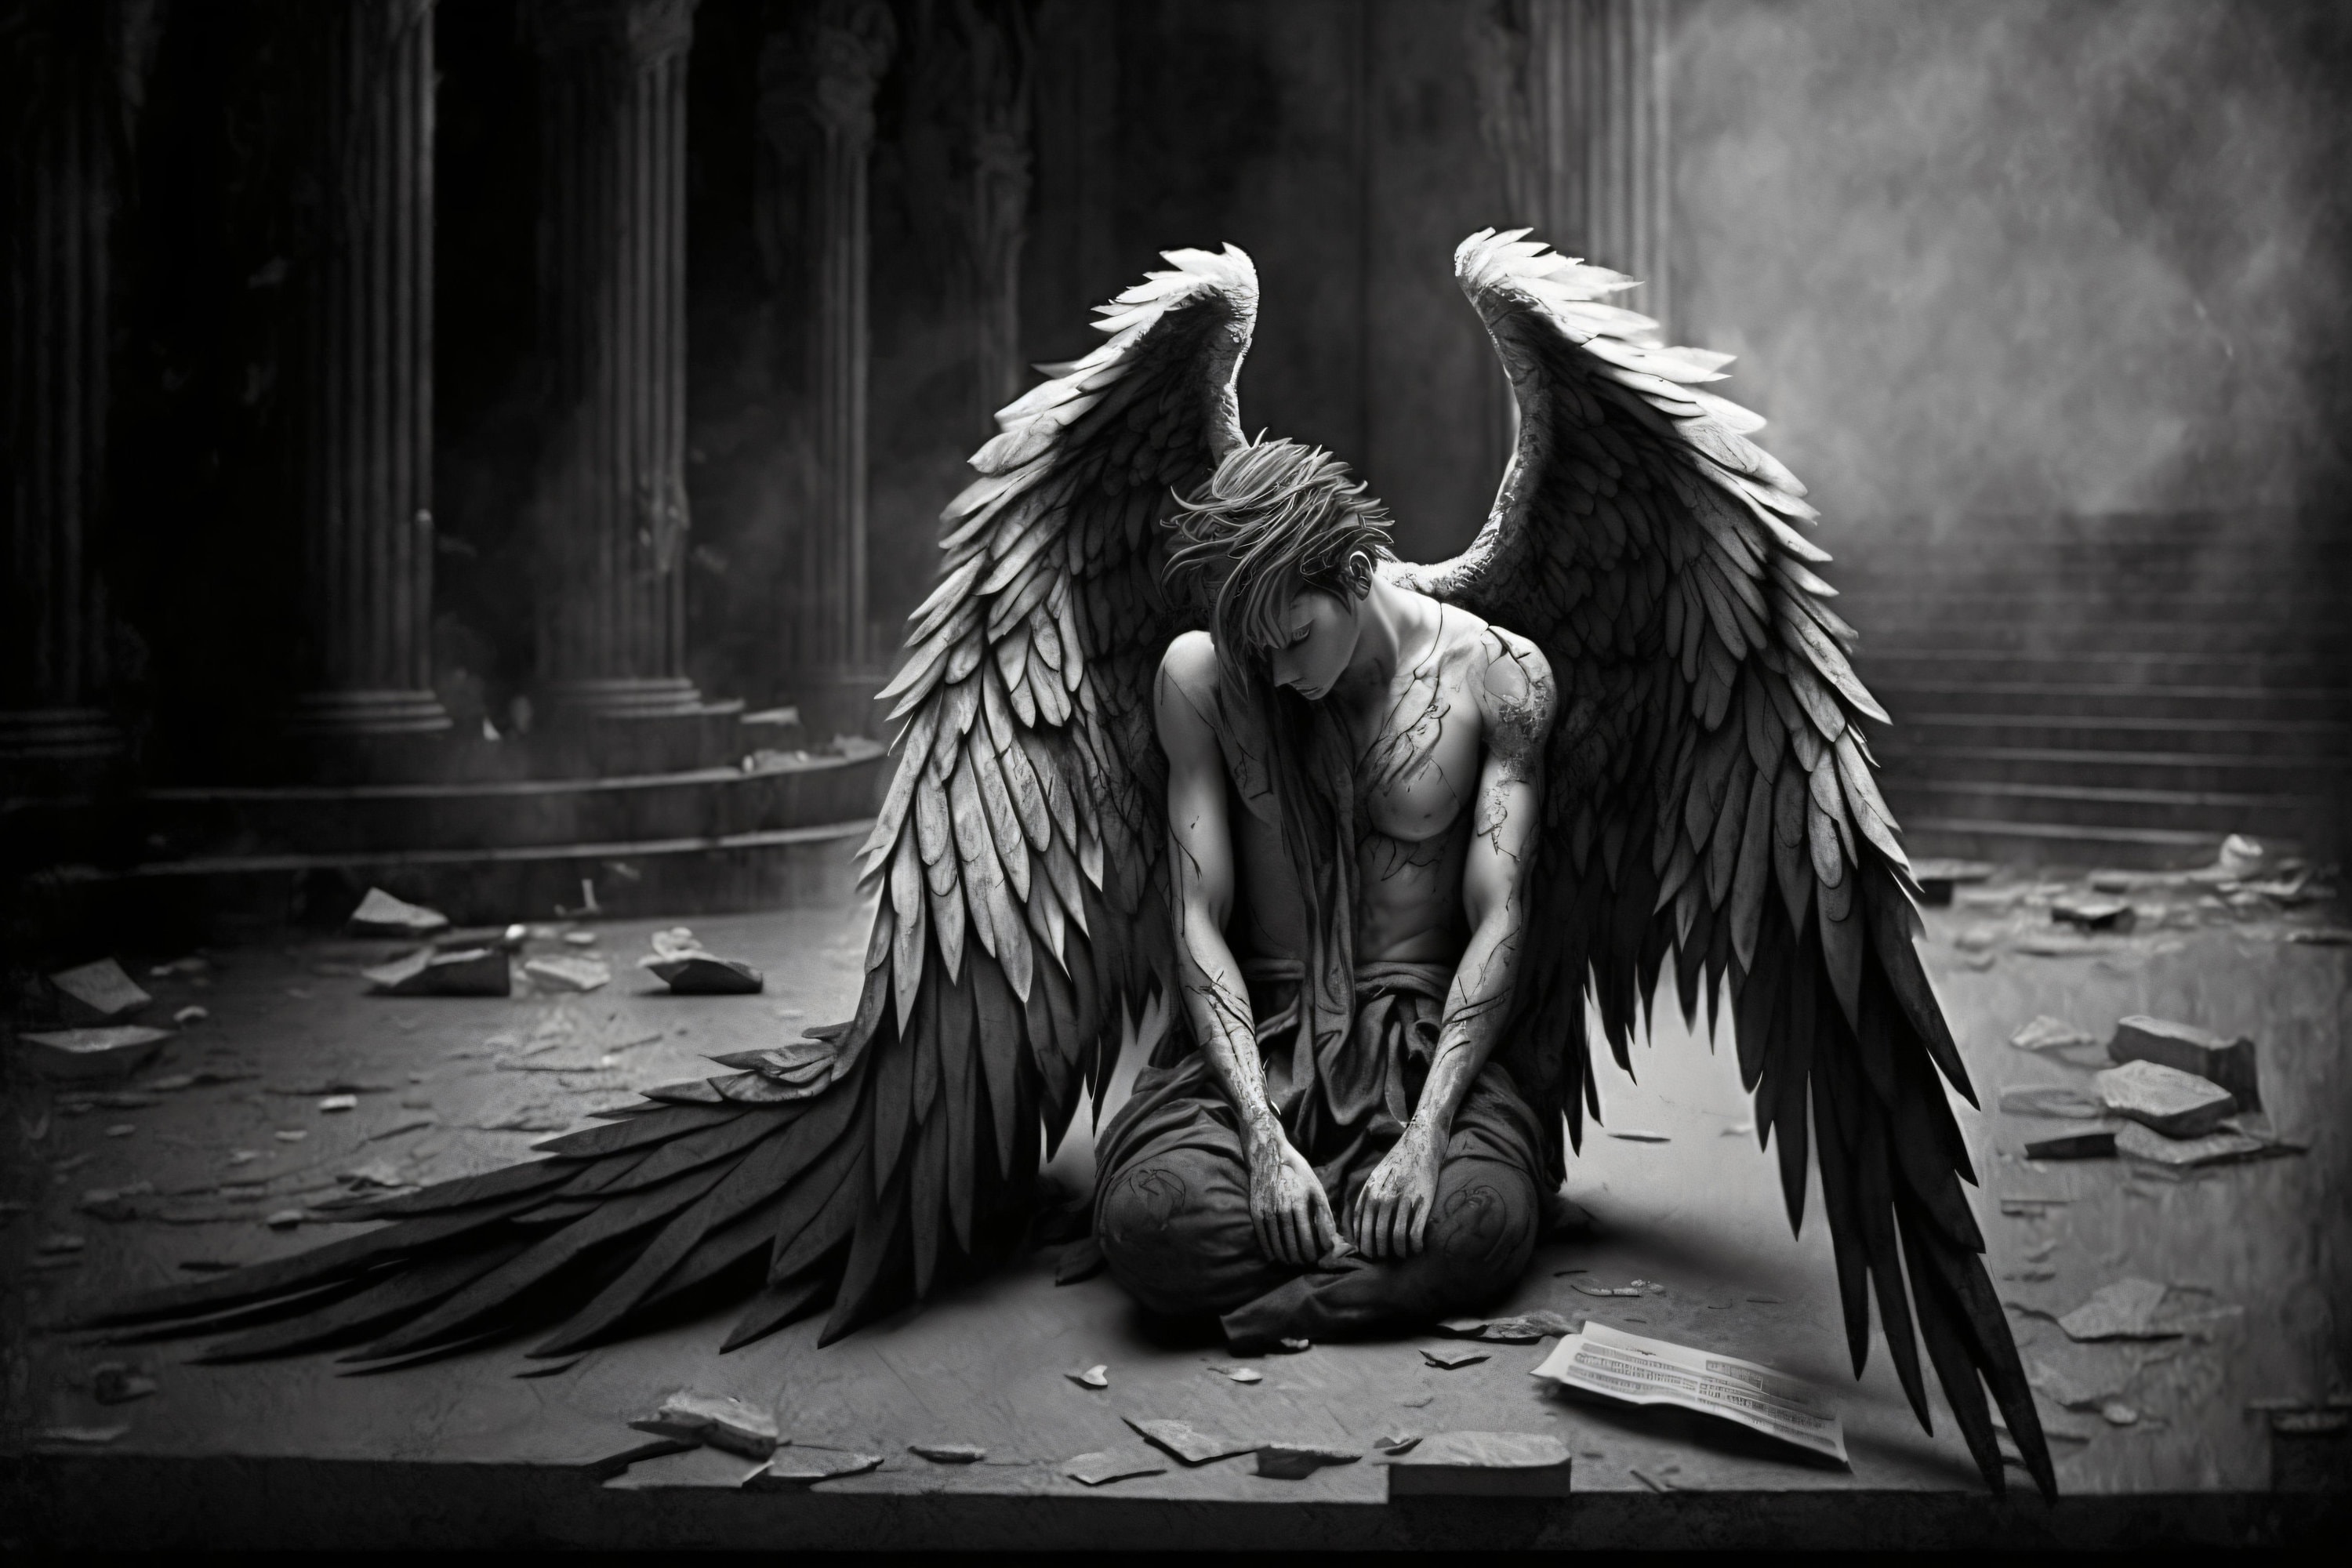 Fallen Angel Canvas, Metal, Acrylic, or Giclee Quality Prints